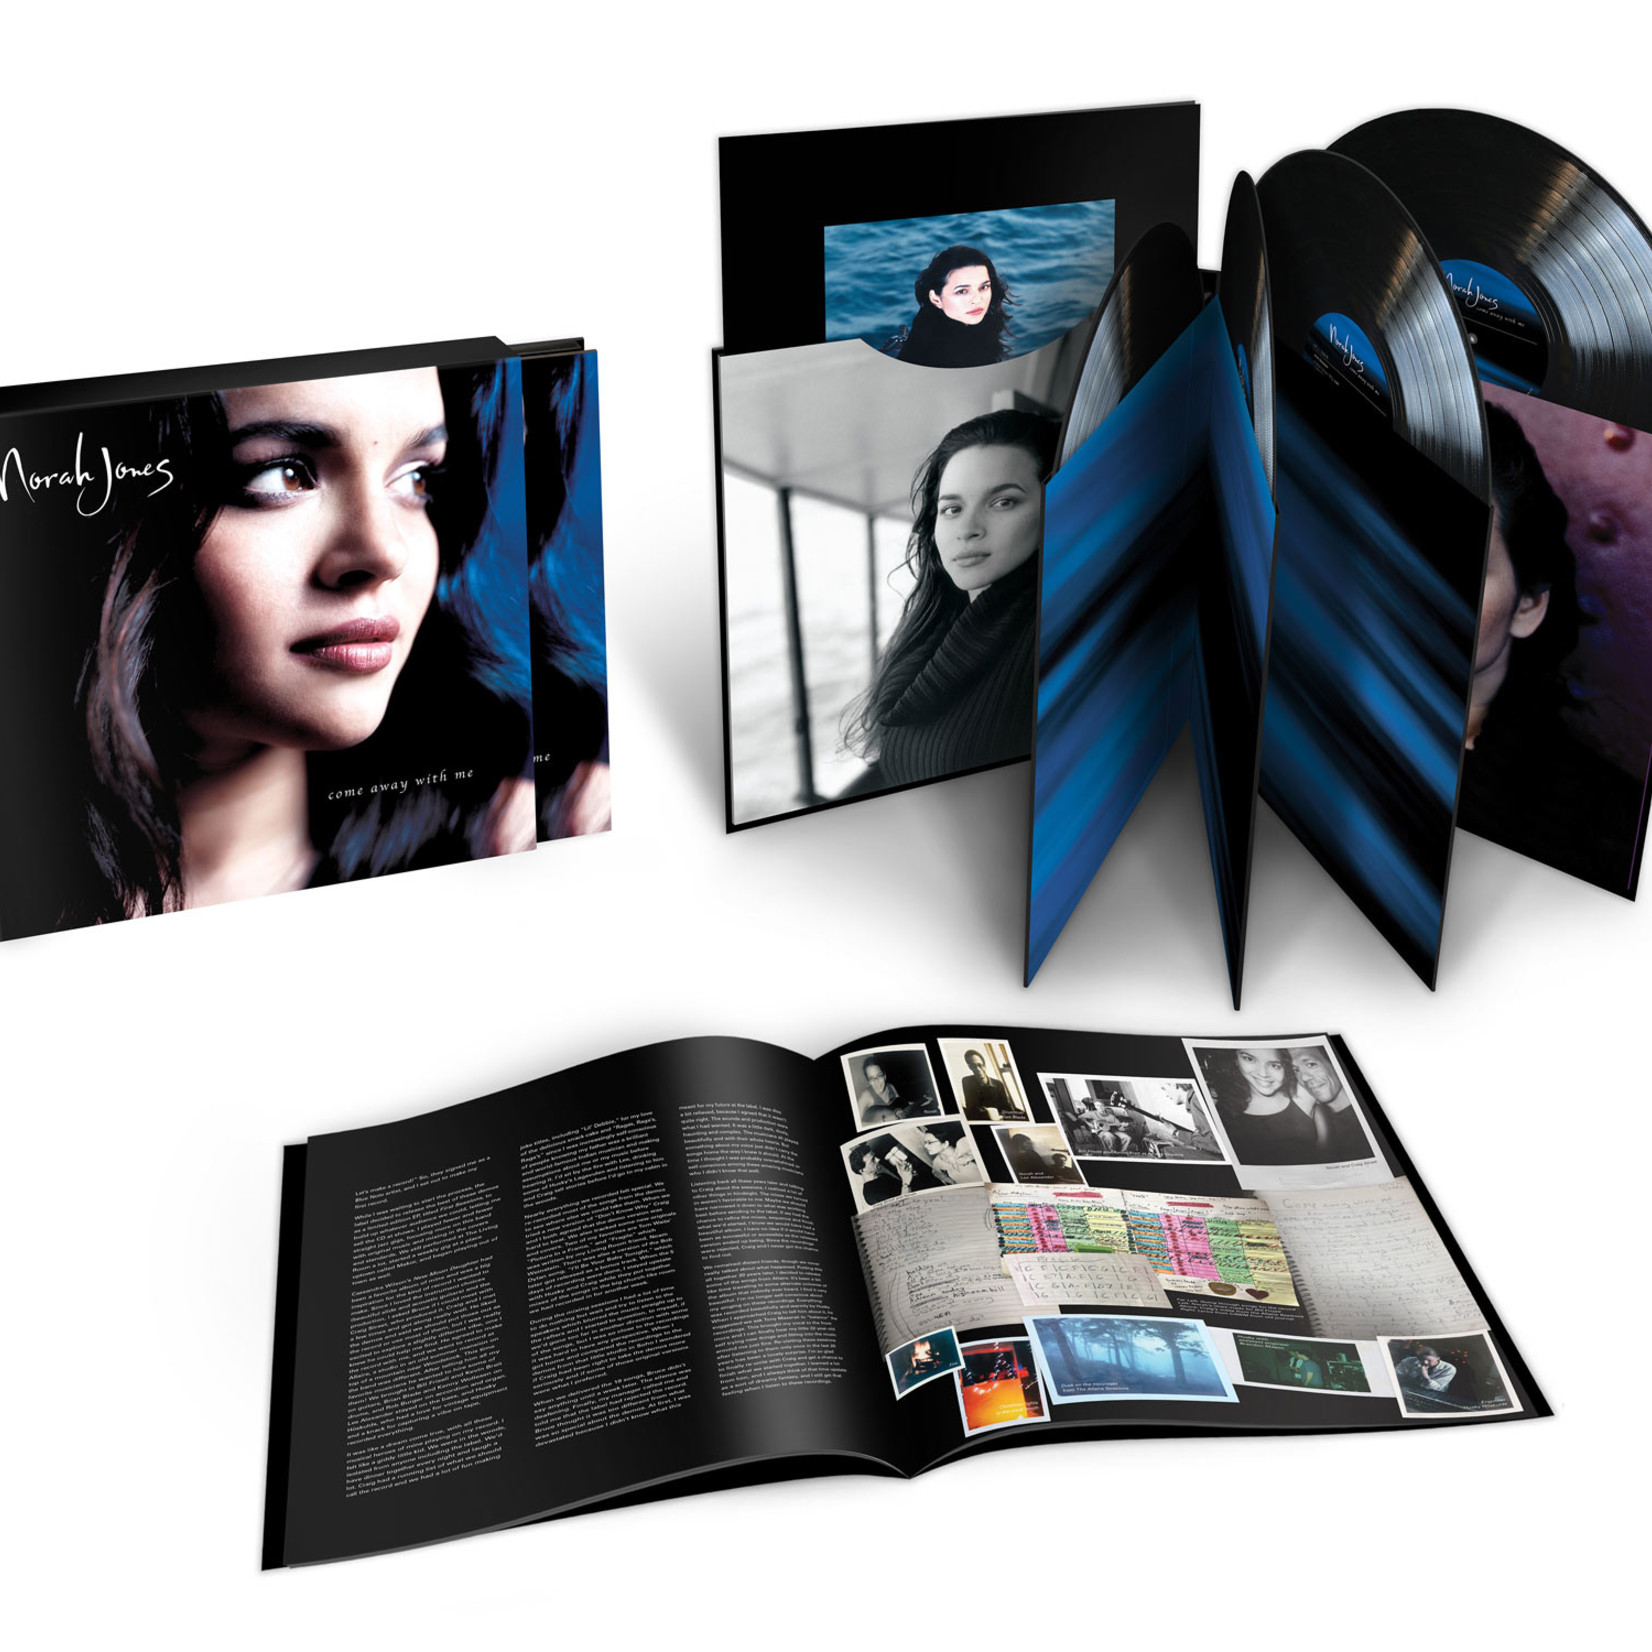 Norah Jones - Come Away With Me (Deluxe 20th Anniversary Edition)